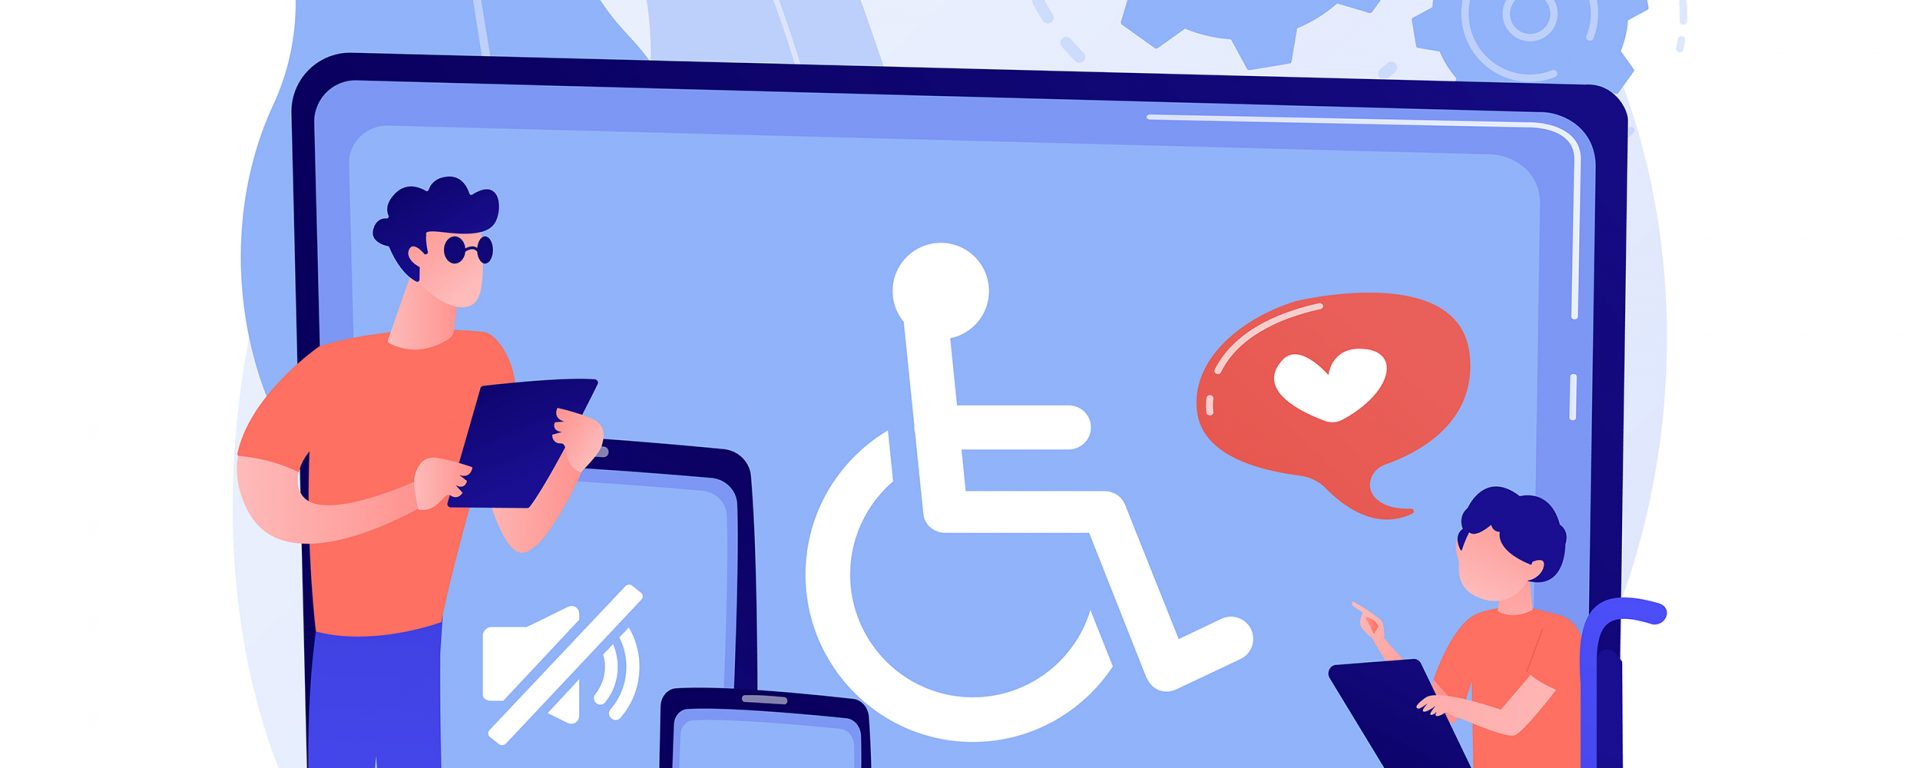 Two individuals in the foreground, working together. The individual to the left is standing and holding a tablet. The individual on the right is in a wheelchair and loving what is showing on their tablet. A laptop screen, enlarged, in the background, displays a stick figure in a wheelchair. This is foregrounded by a tablet screen displaying a megaphone with a line through it, or "no sound;" and a phone screen that displays an eye with a line through it, or "no vision."